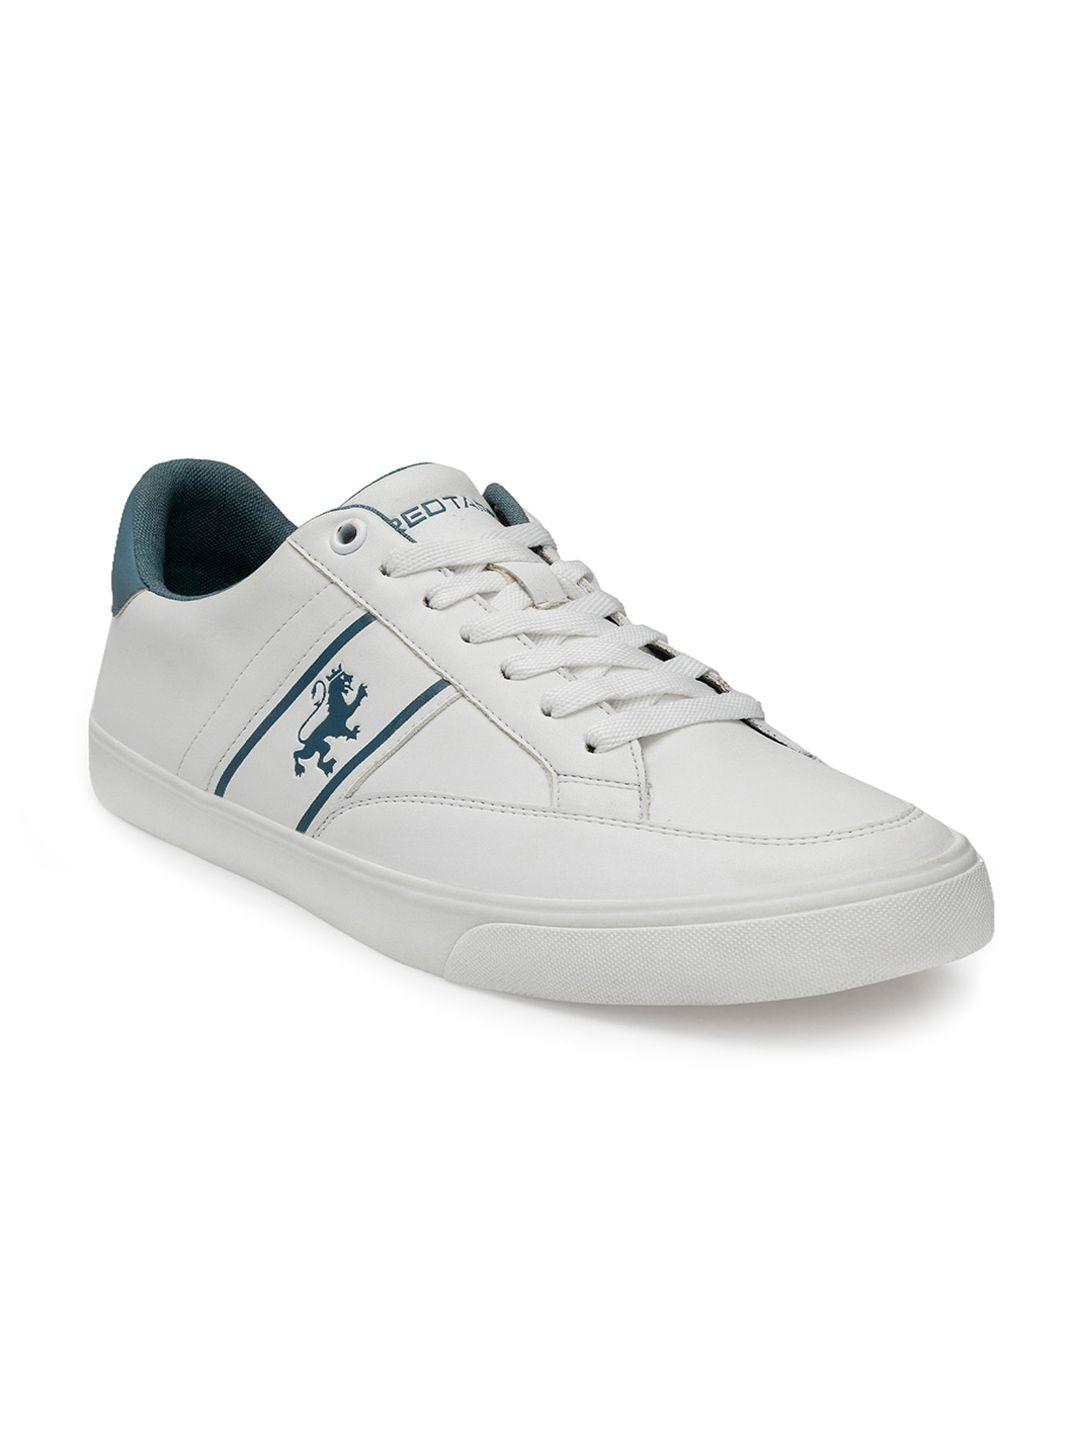 red tape men white lace-up casual sneakers